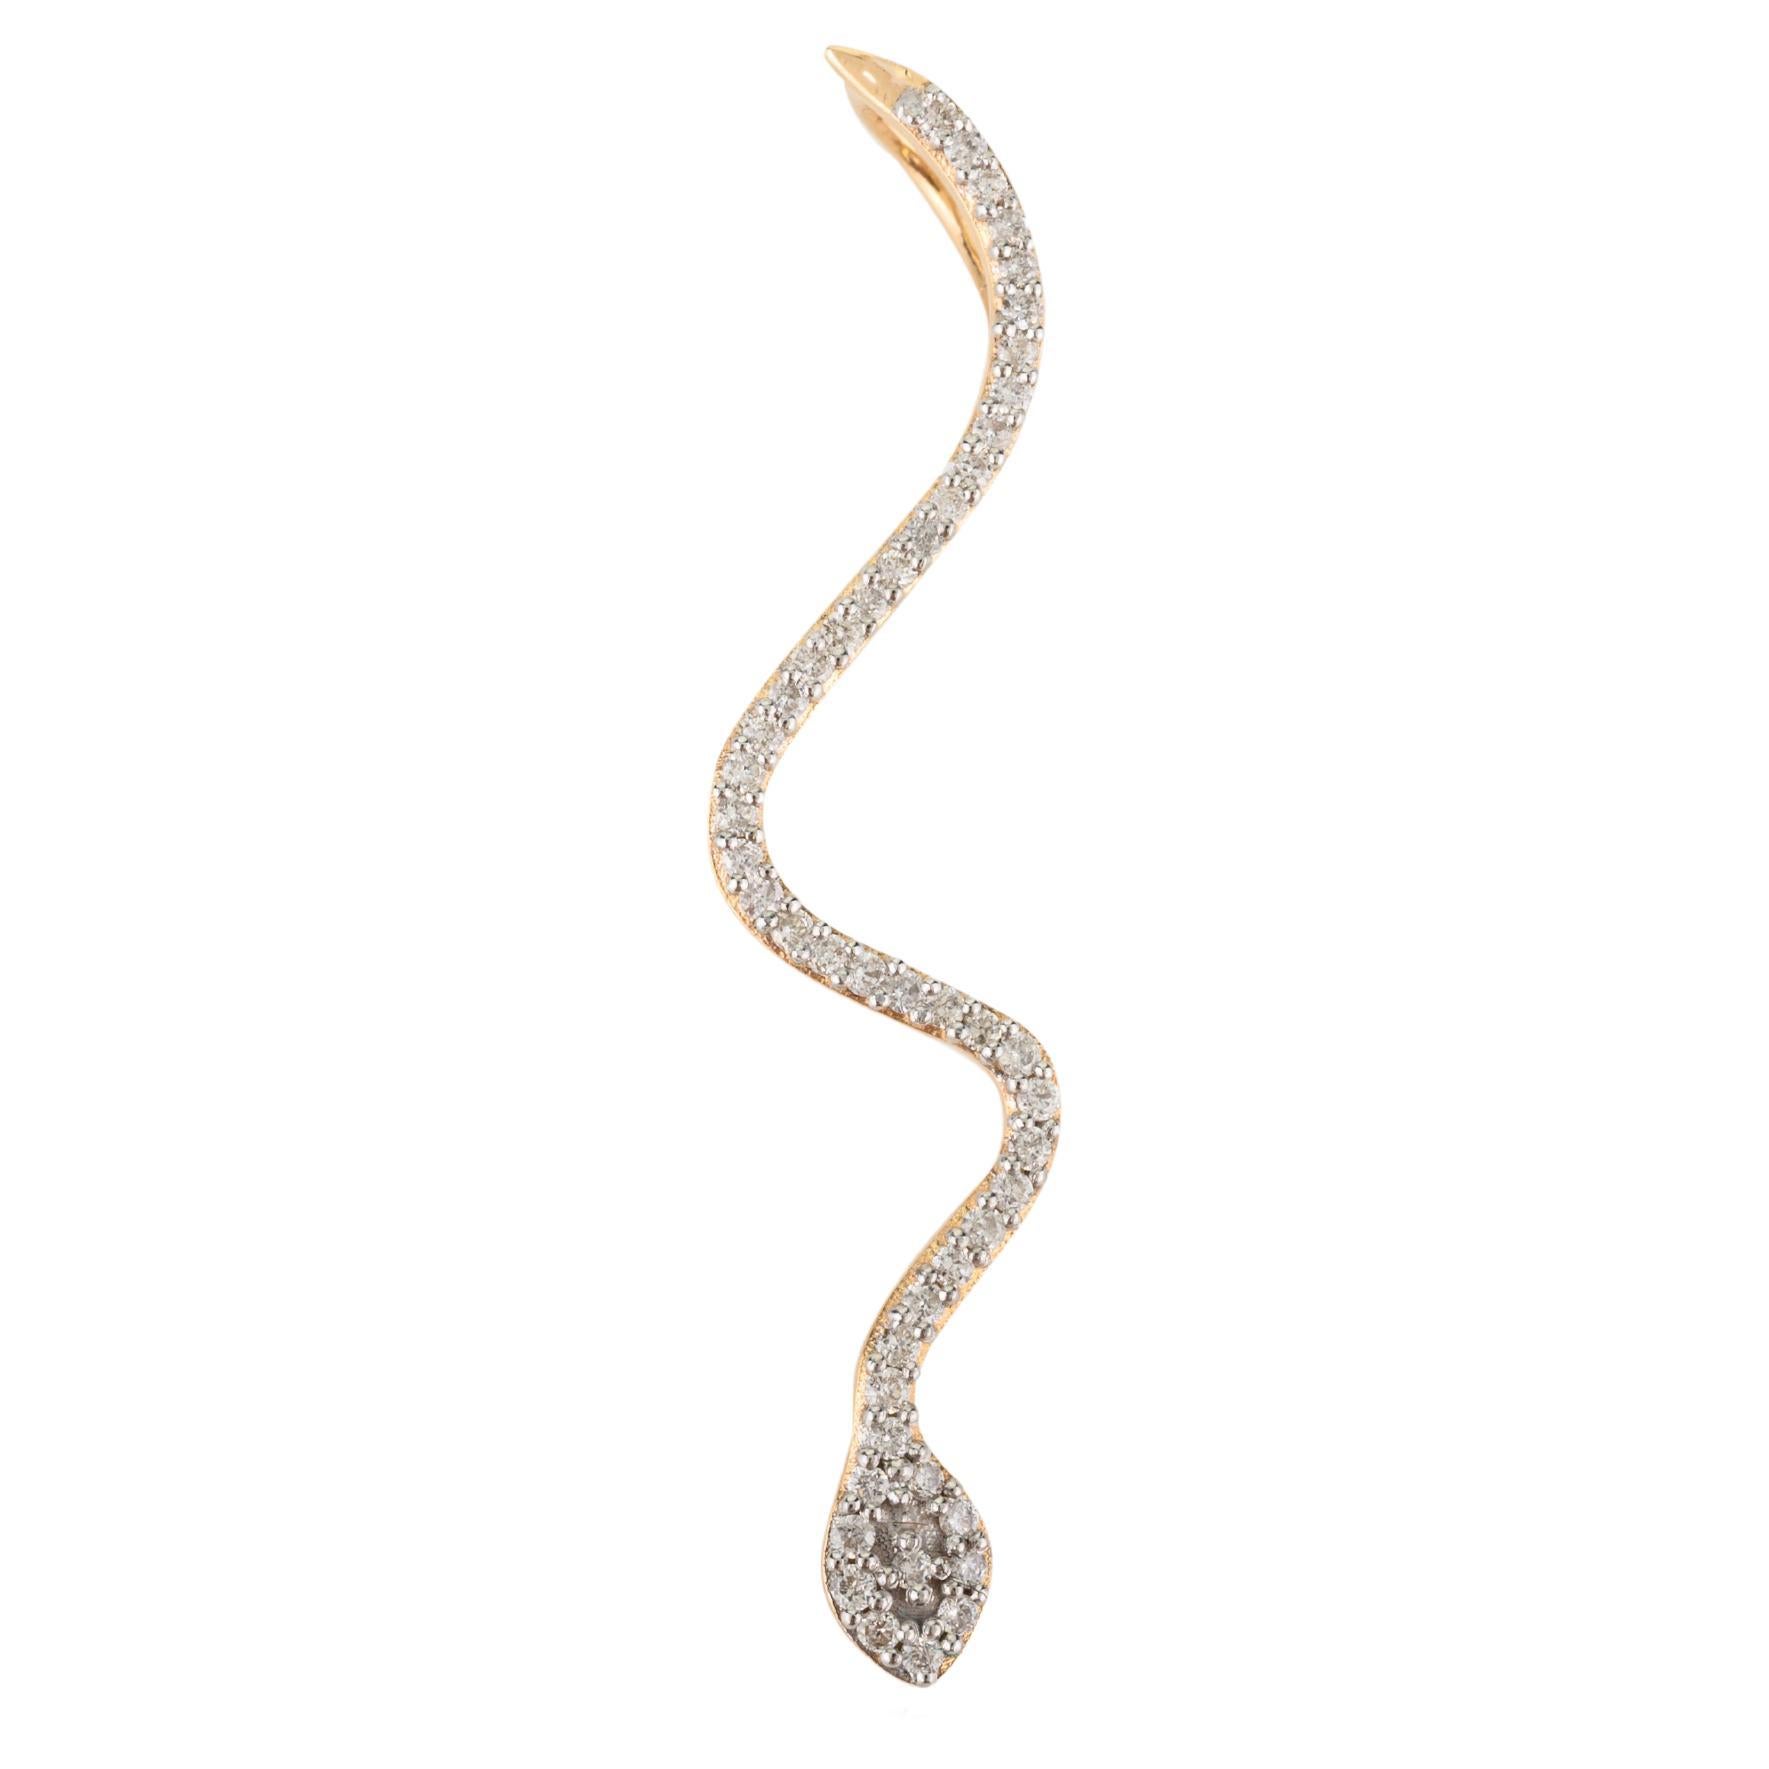 Minimalist Certified Diamond Serpent Snake 18k Yellow Gold Pendant Necklace For Sale